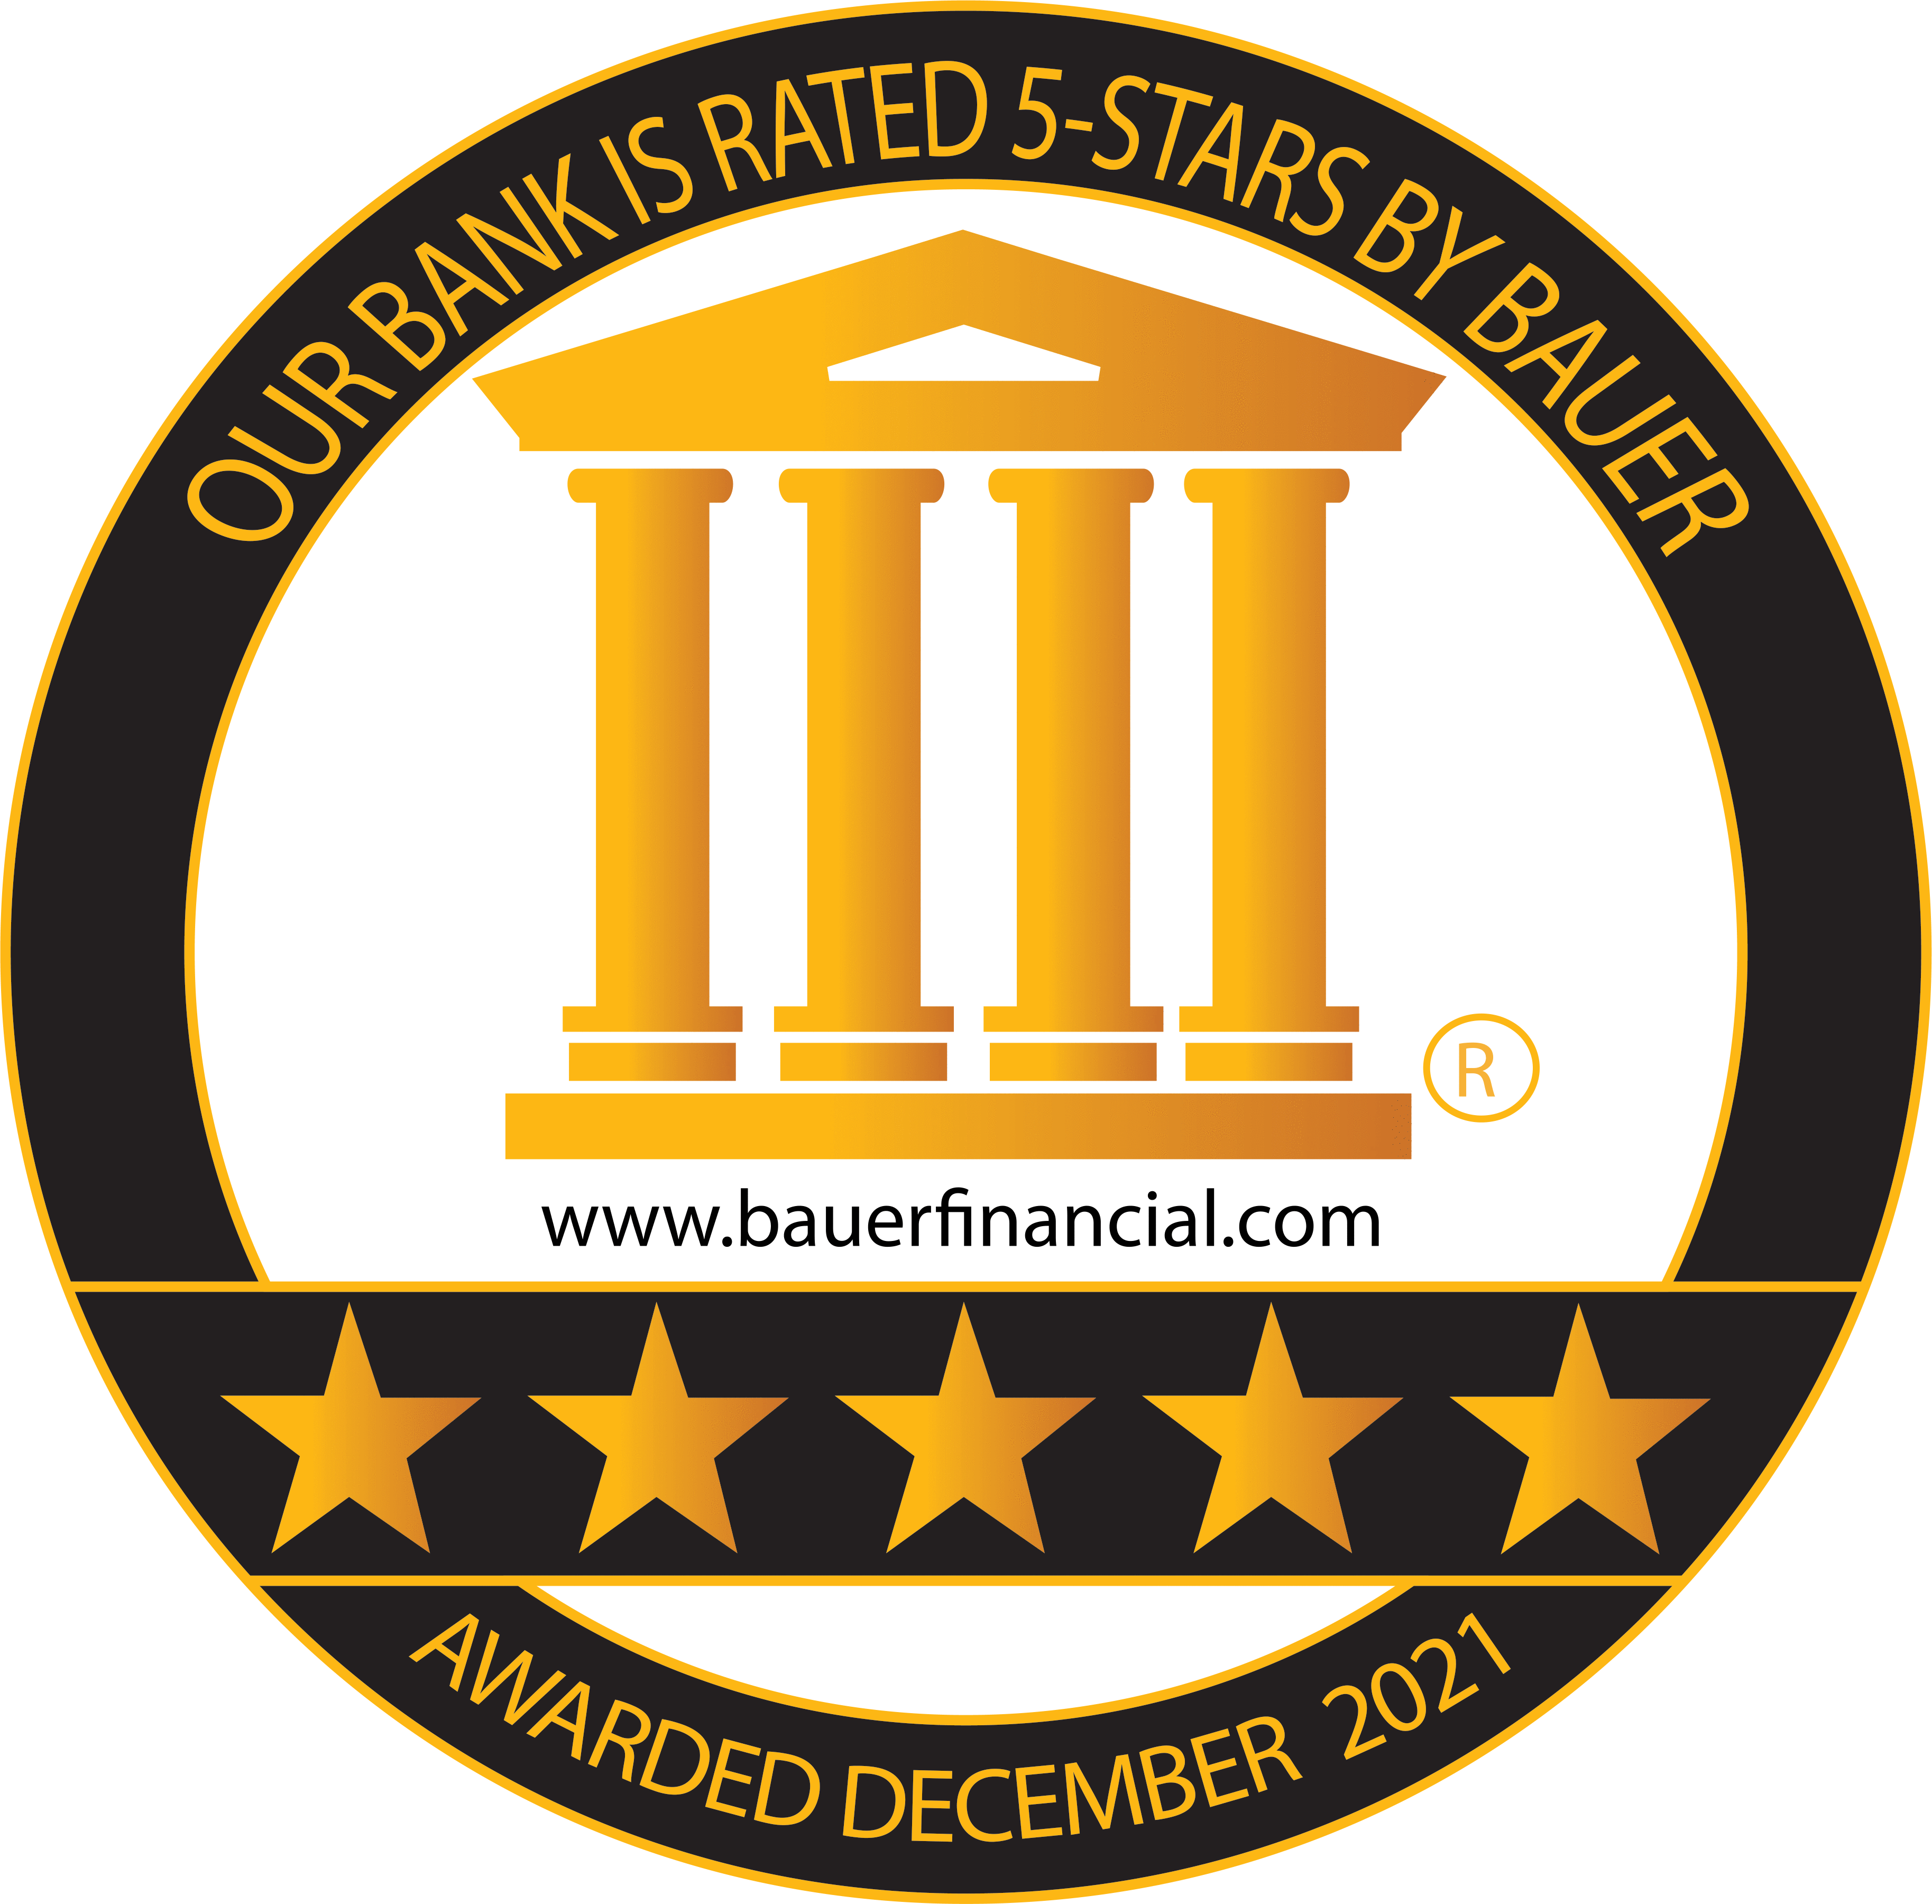 5 Star Bauer Financial Inc. rating